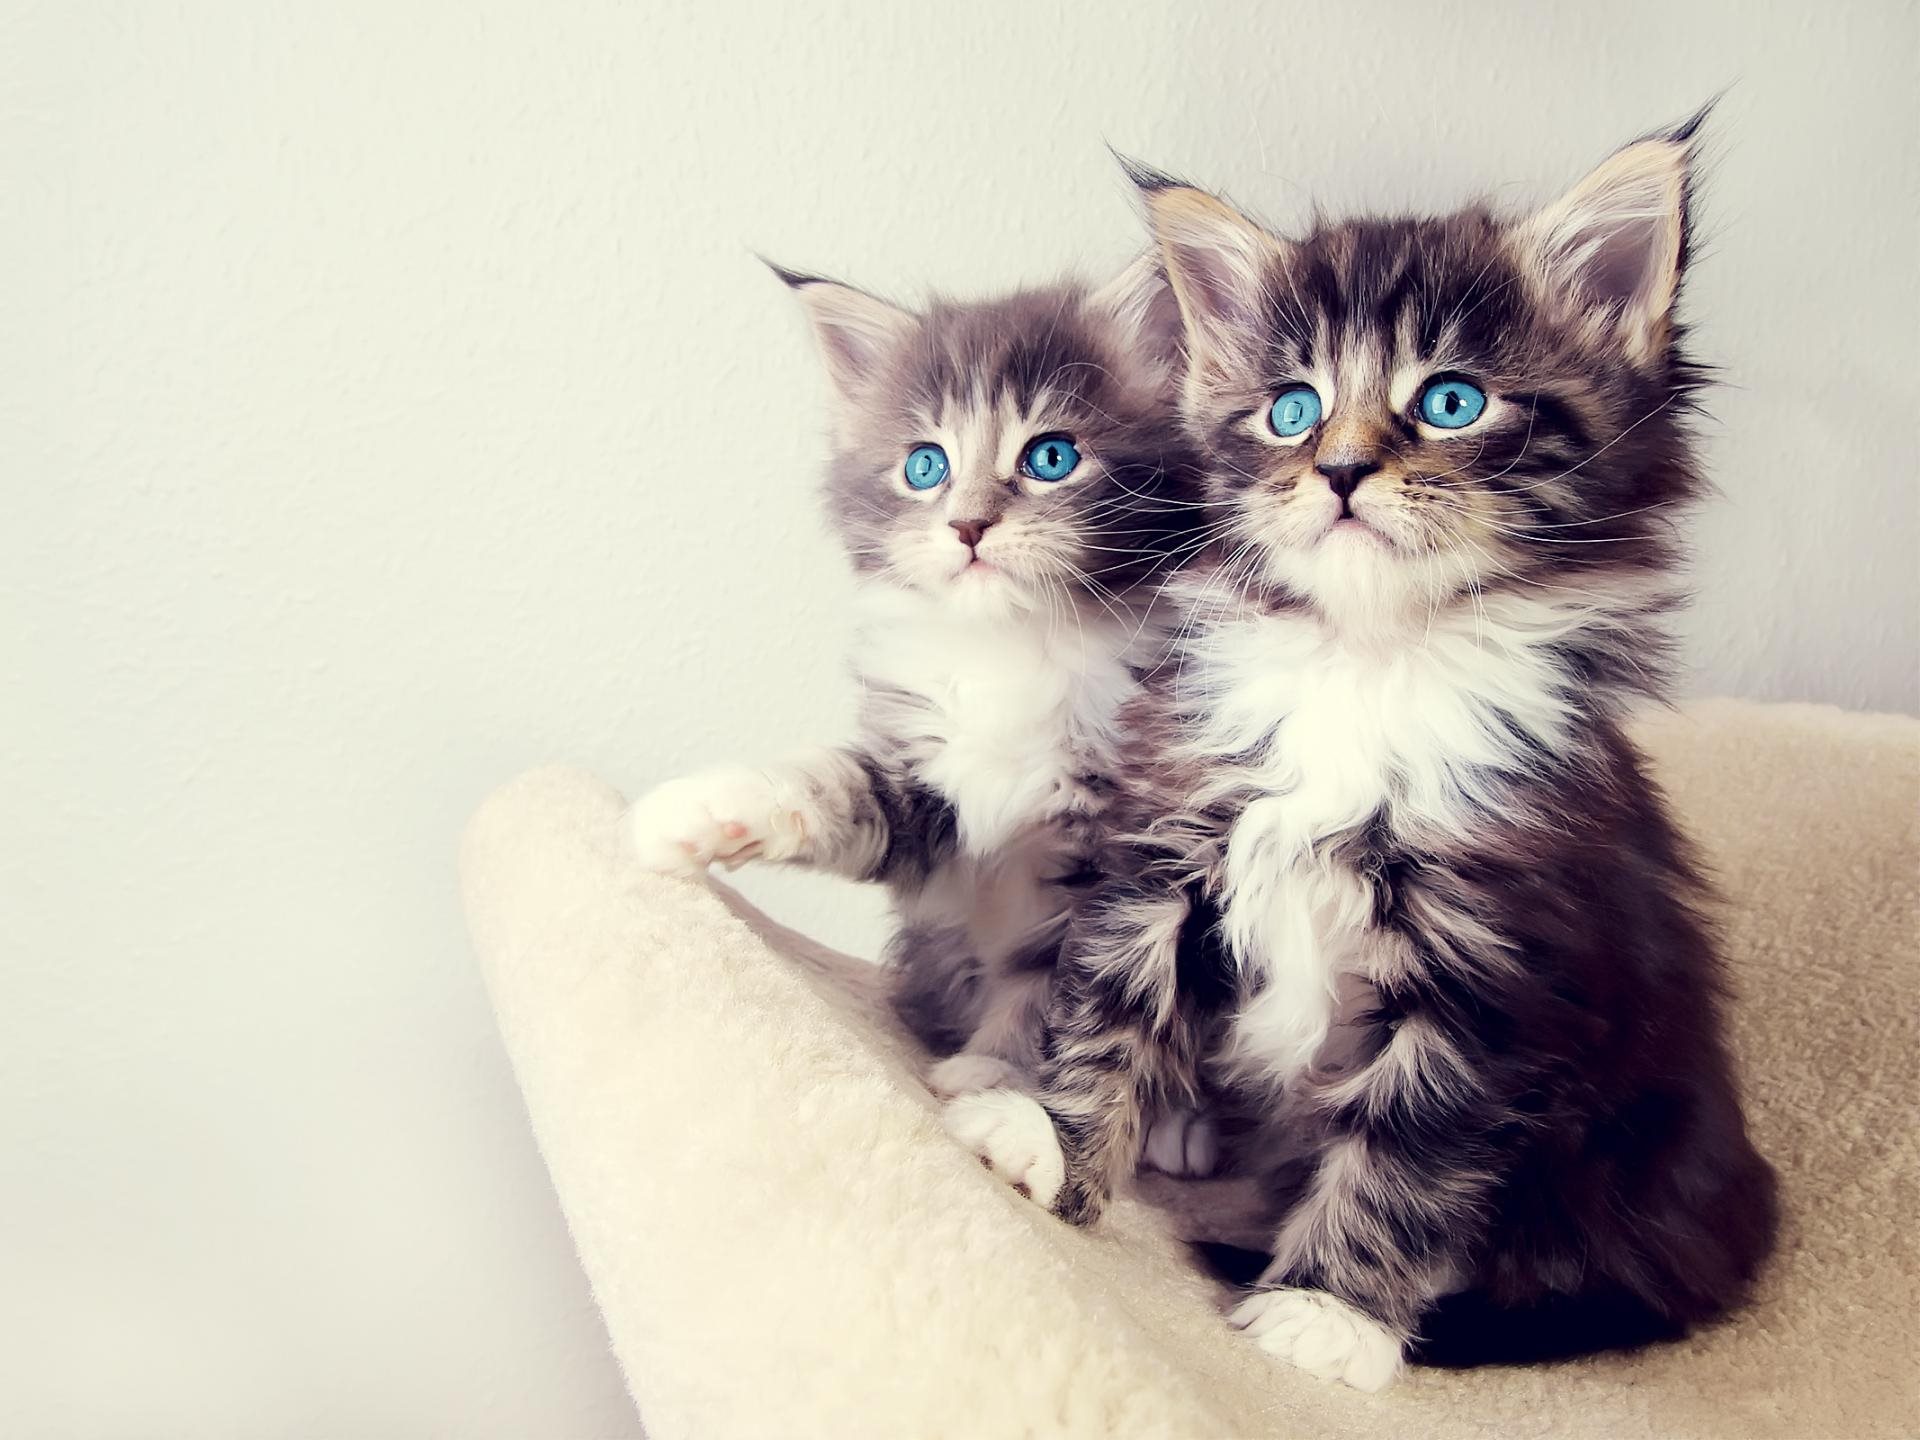 Two kittens with blue eyes / 1920 x 1440 / Animals / Photography ...